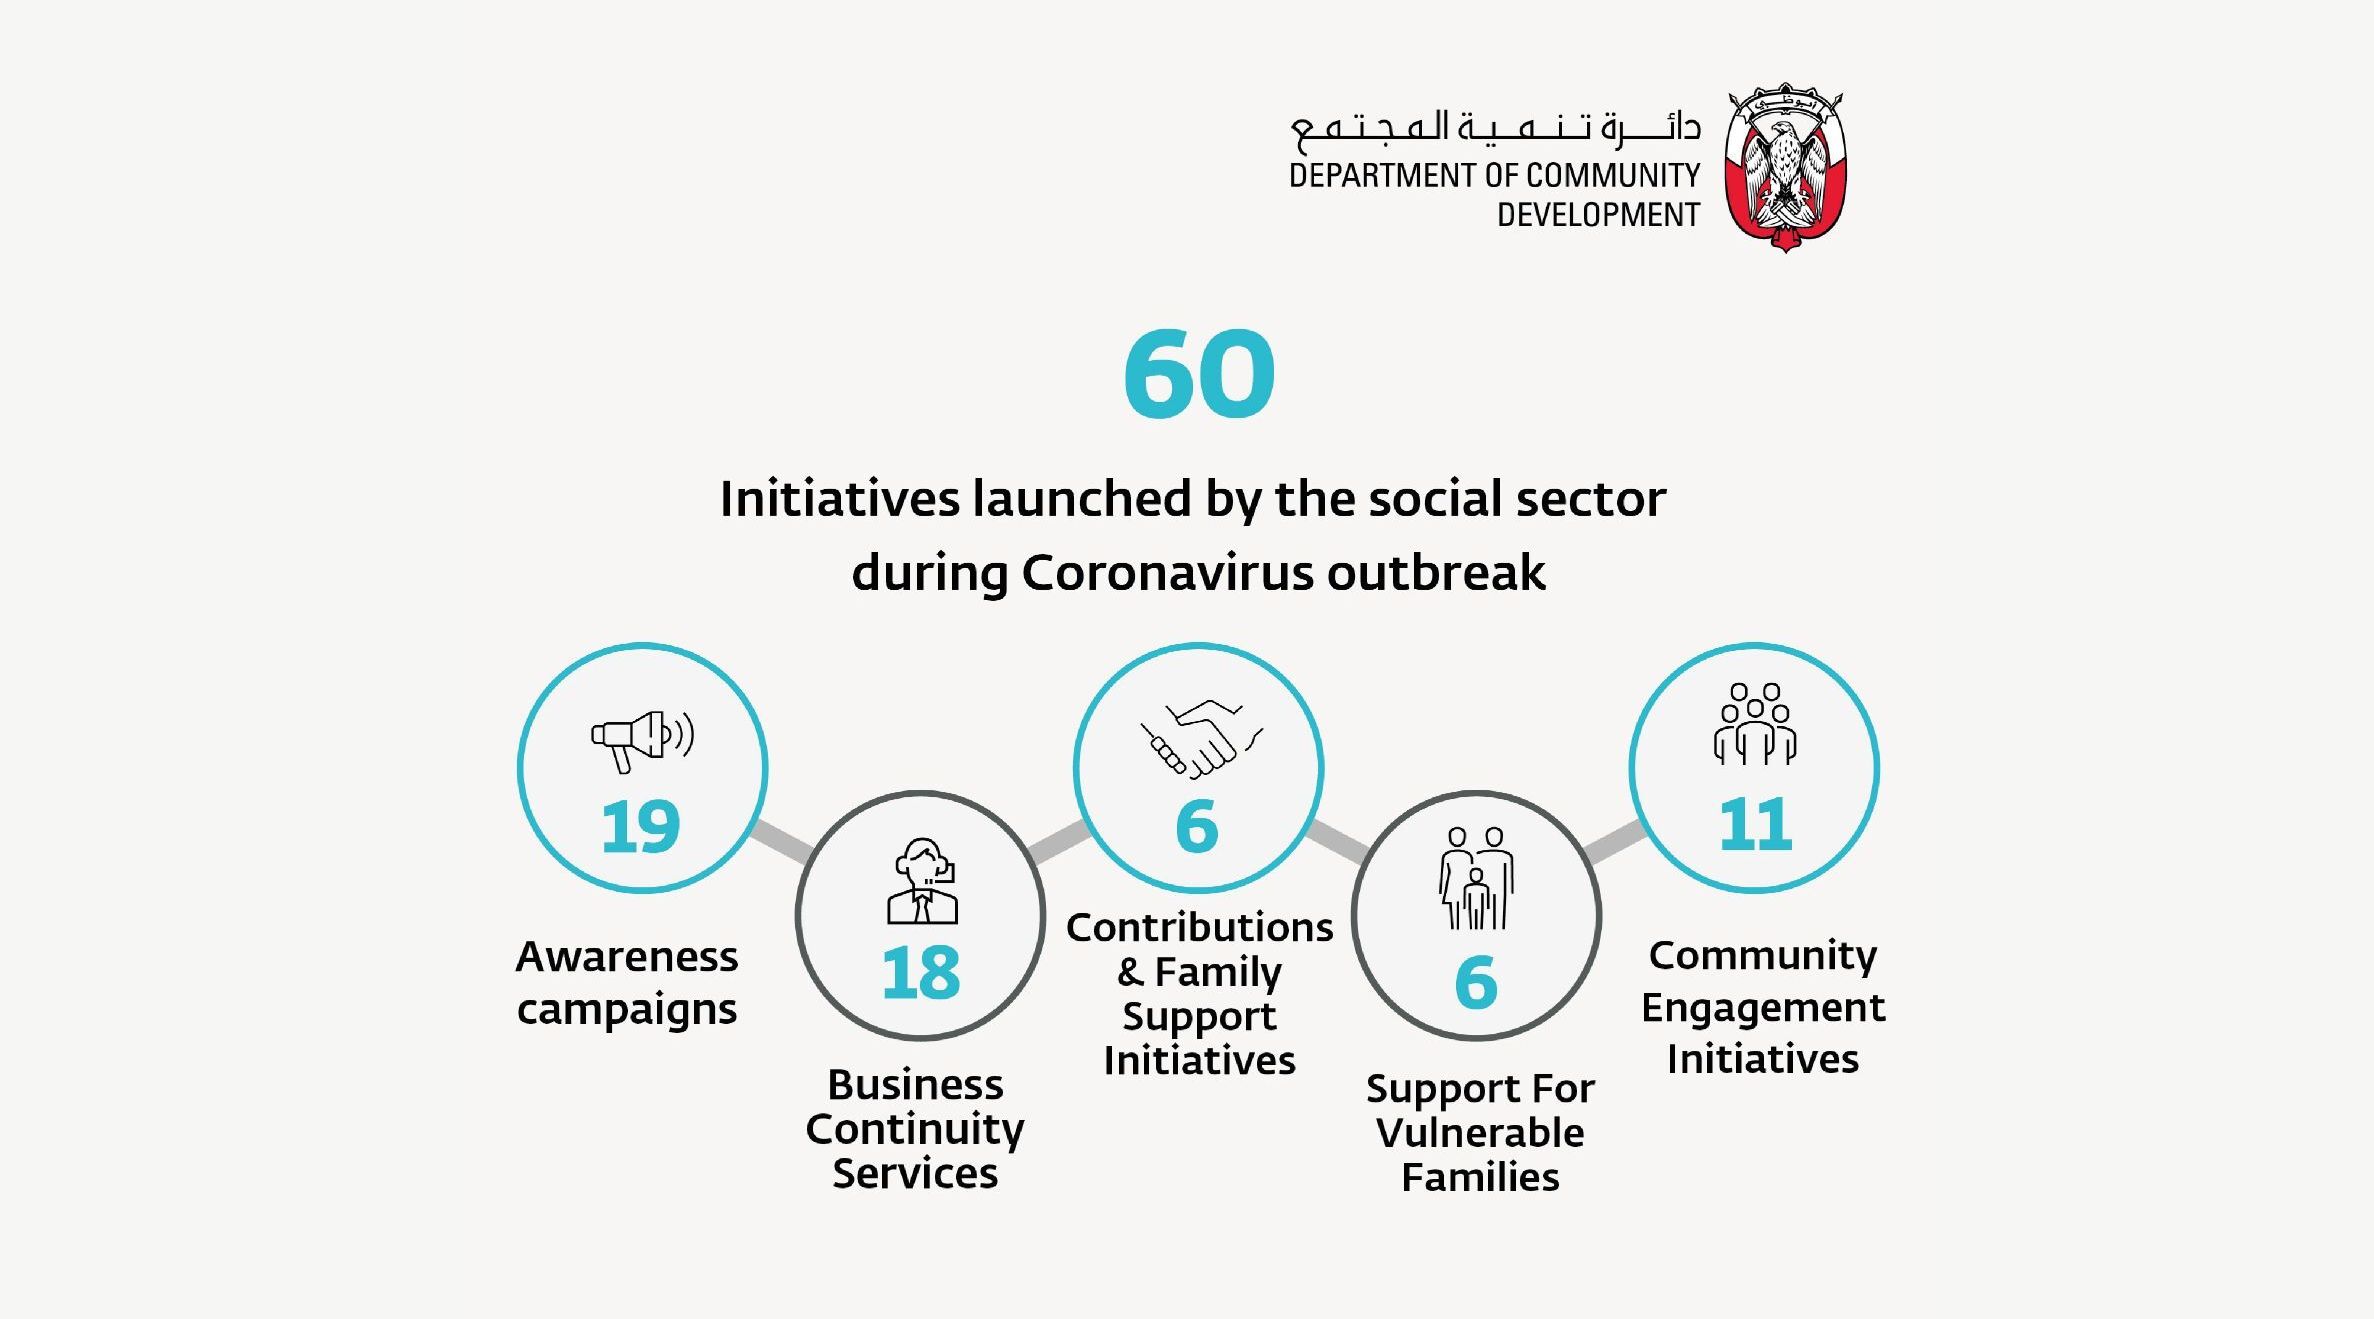 60 community initiatives launched in Abu Dhabi to respond to COVID-19